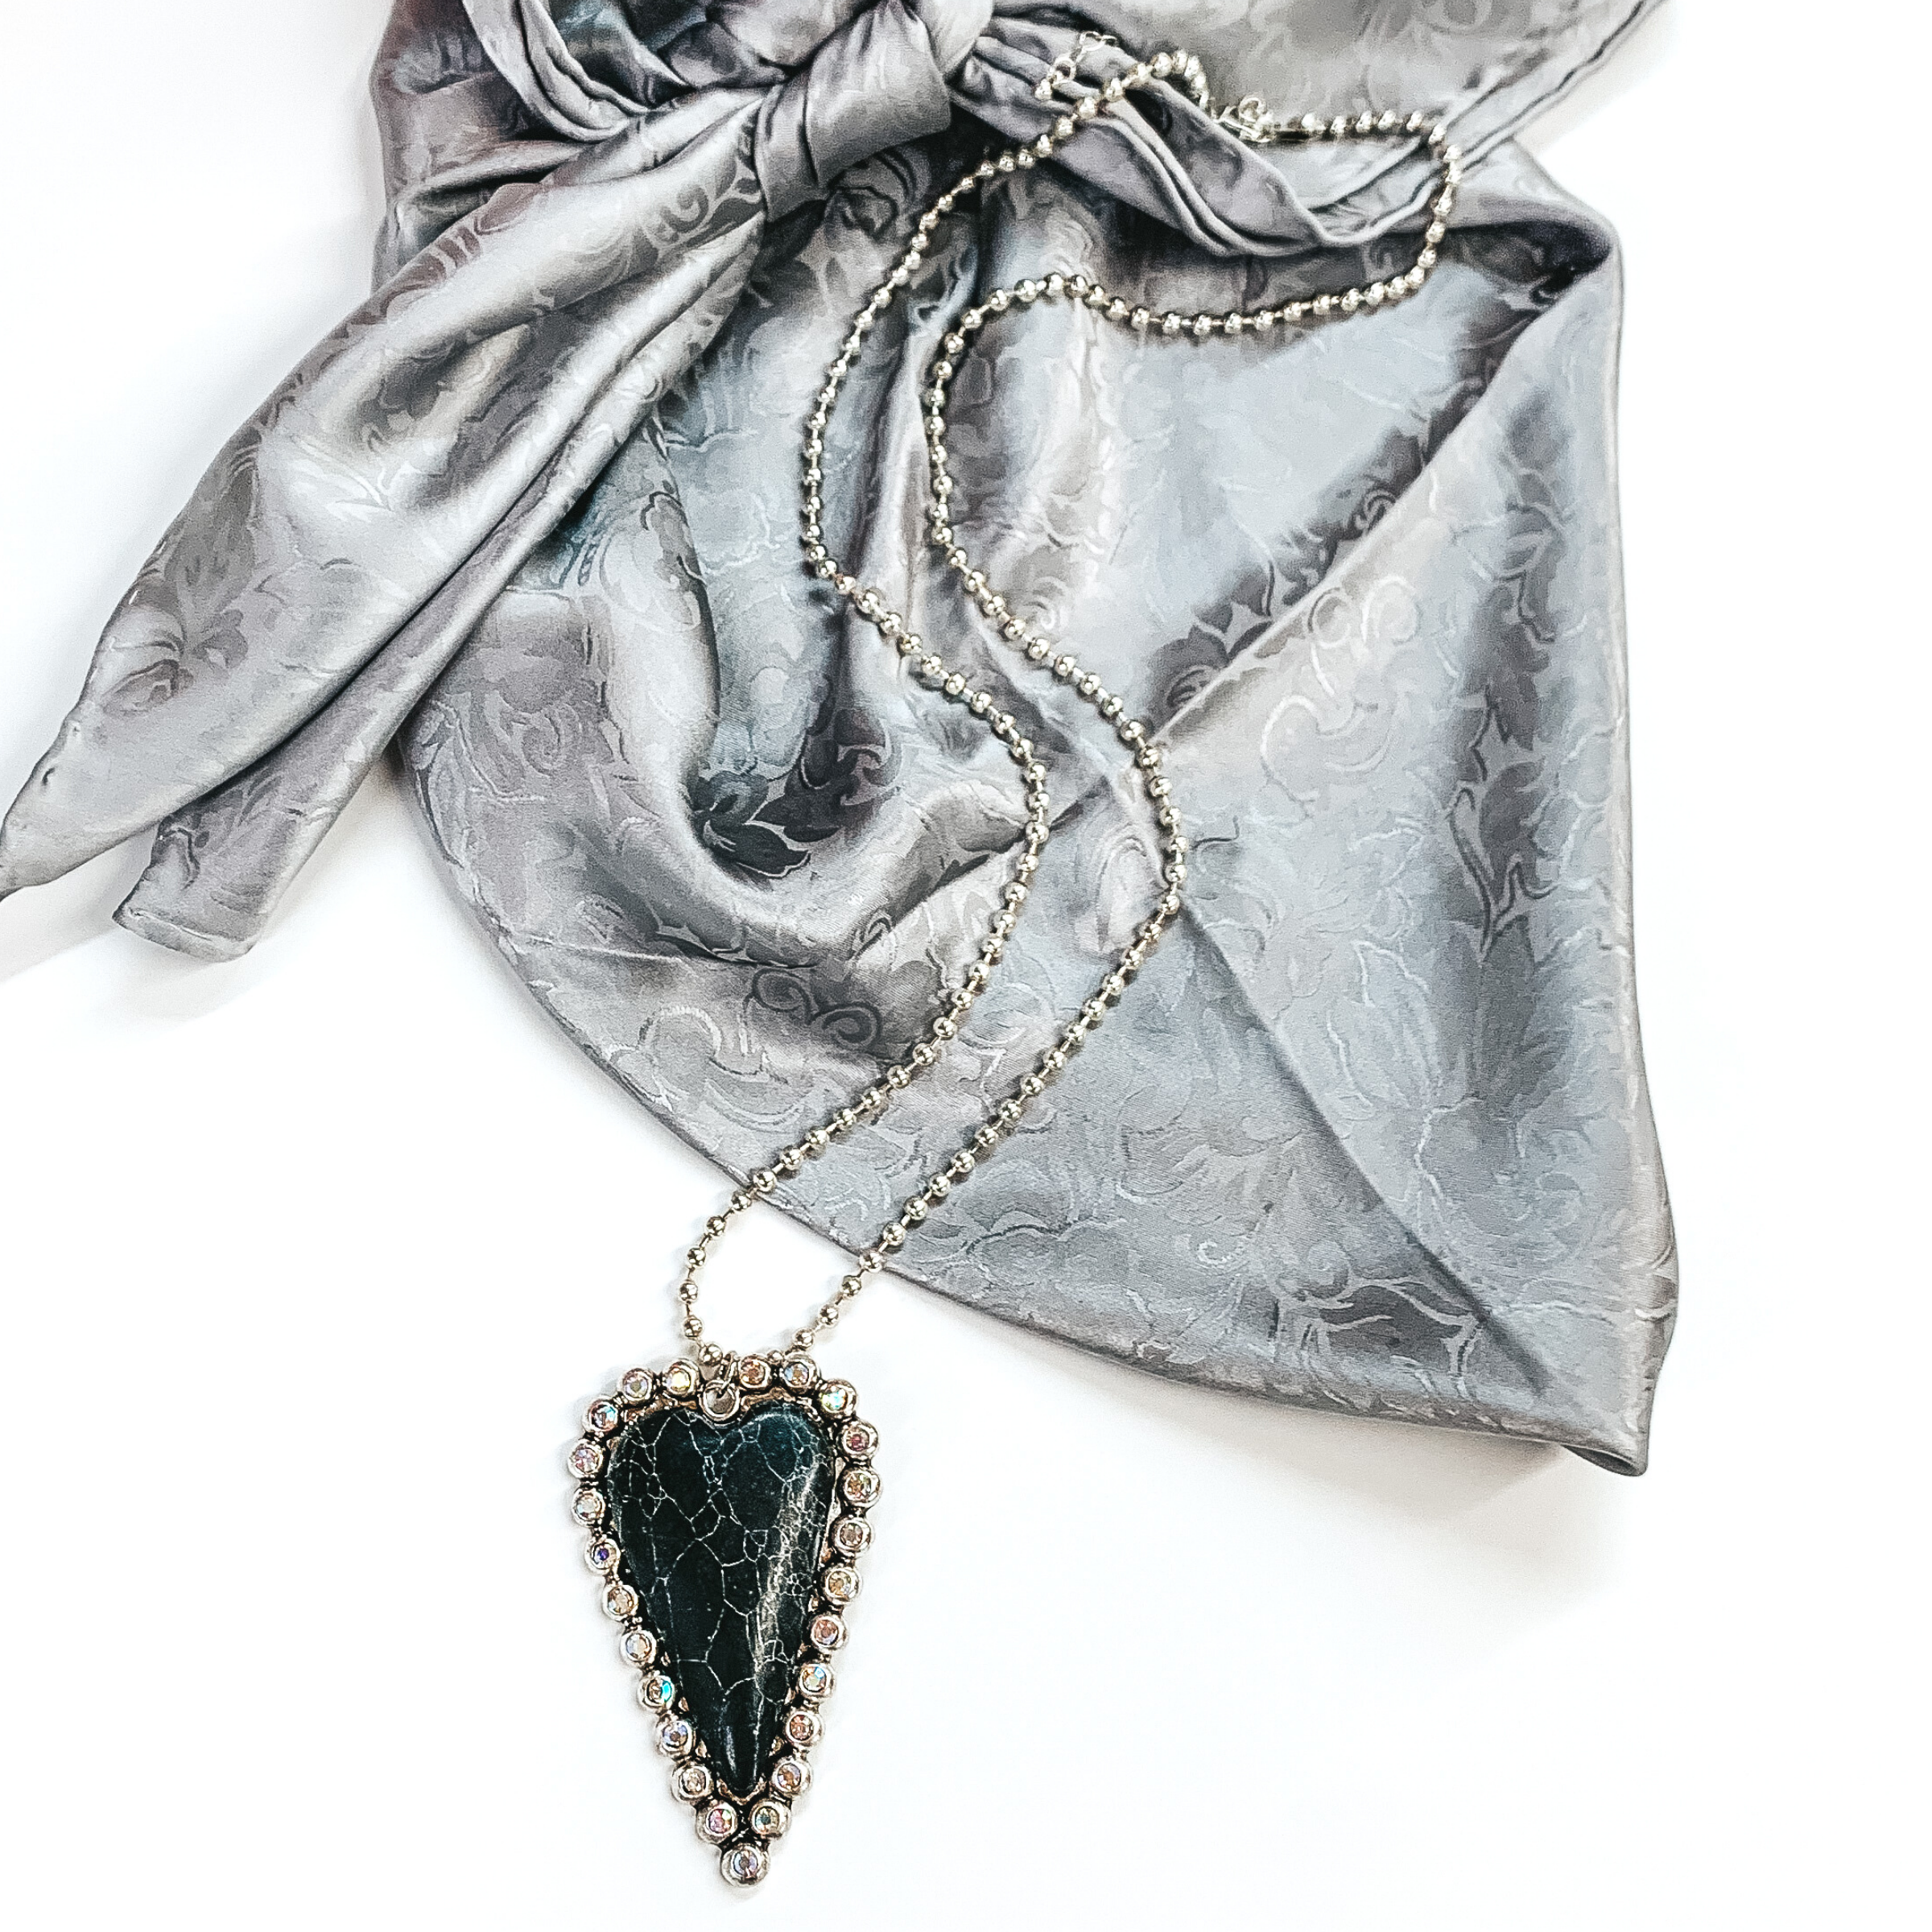 Silver Beaded Necklace and Stone Heart Pendant with AB Crystal Outline in Black - Giddy Up Glamour Boutique